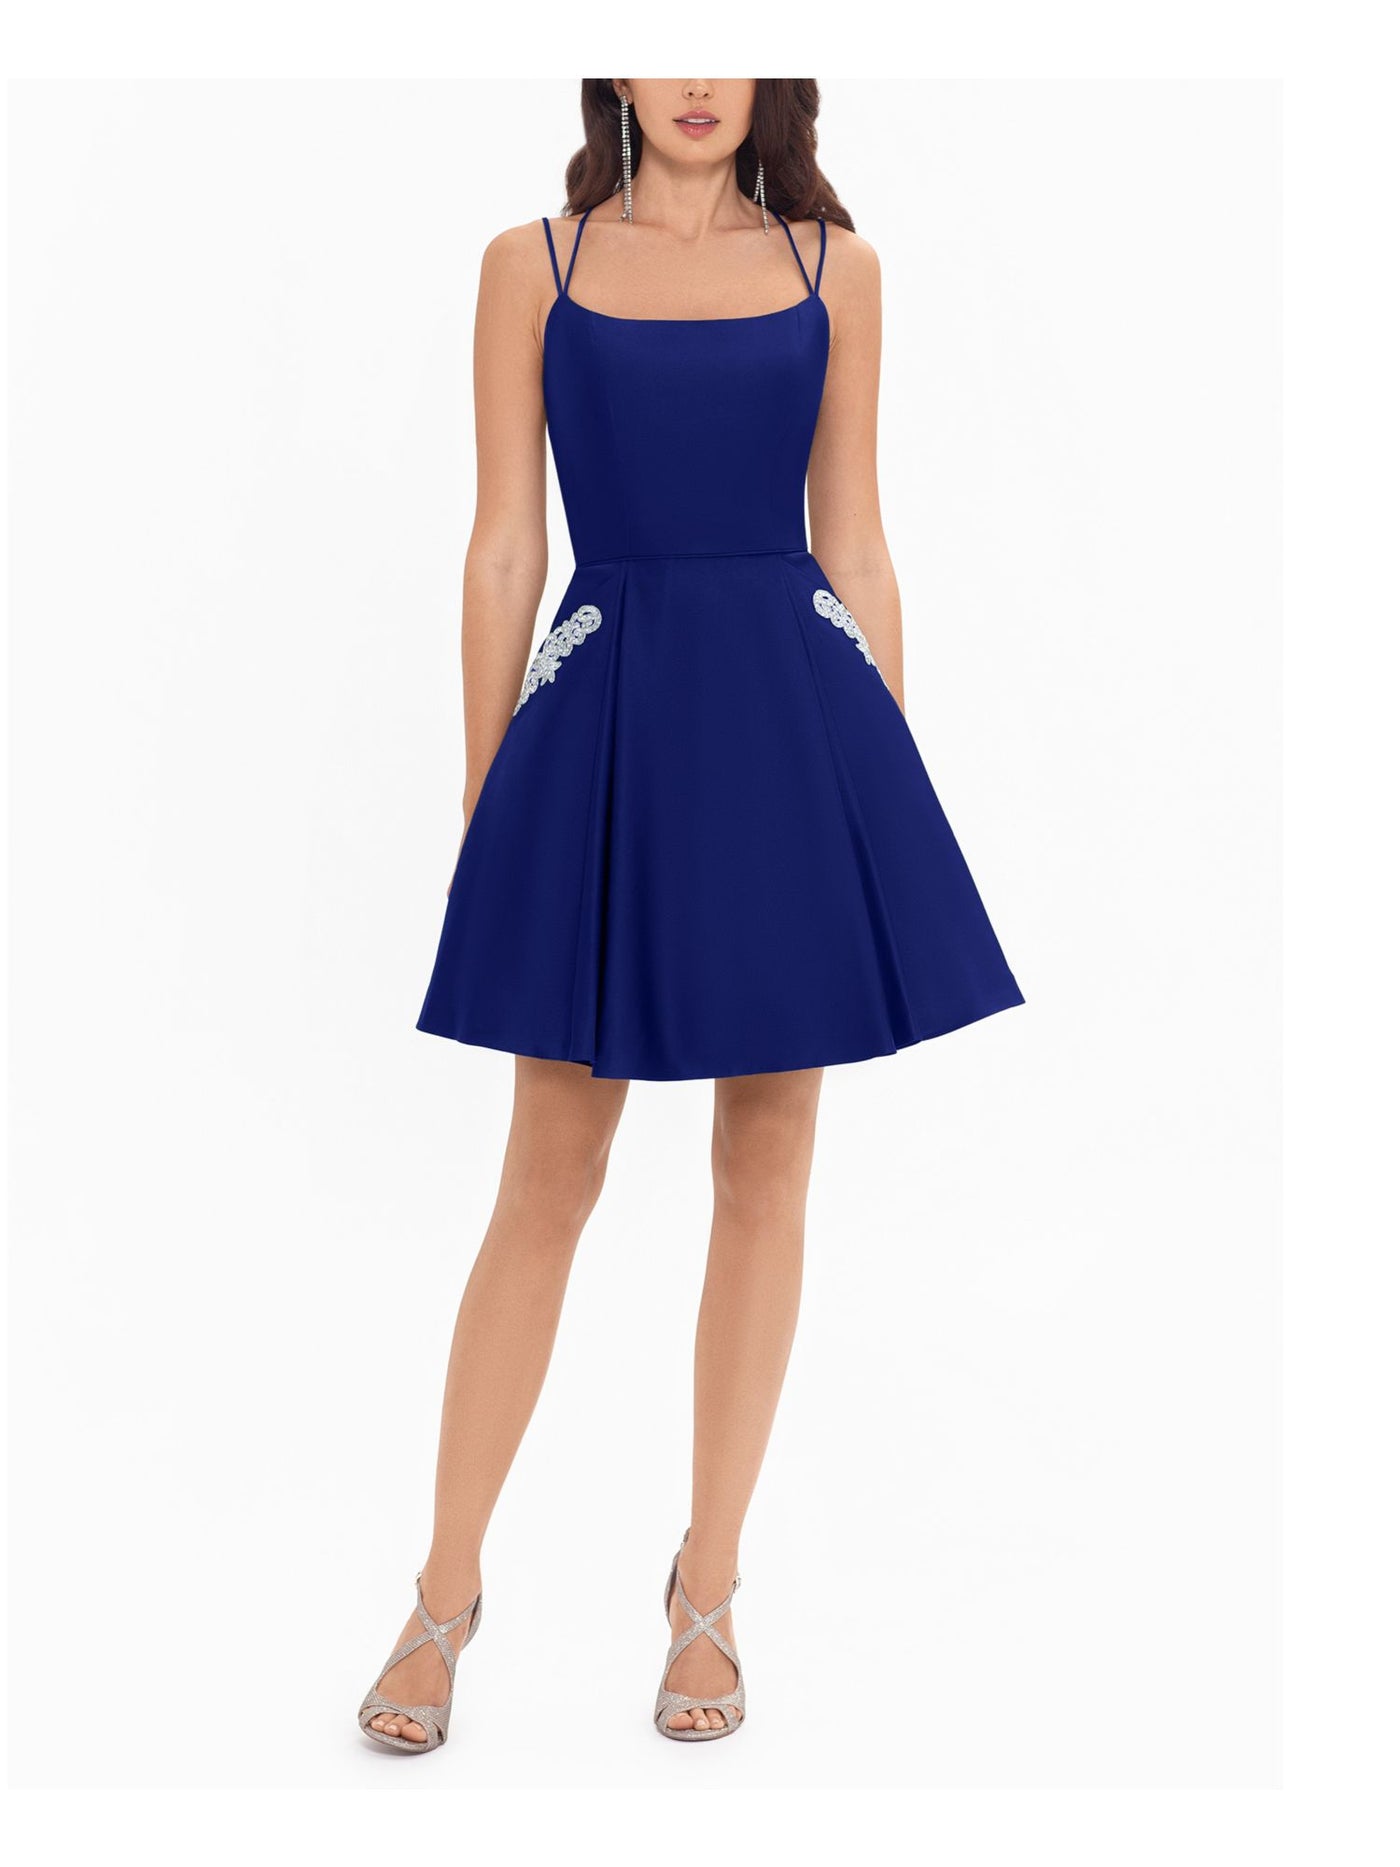 BLONDIE NITES Womens Blue Embellished Zippered Spaghetti Strap Scoop Neck Short Party Fit + Flare Dress Juniors 3